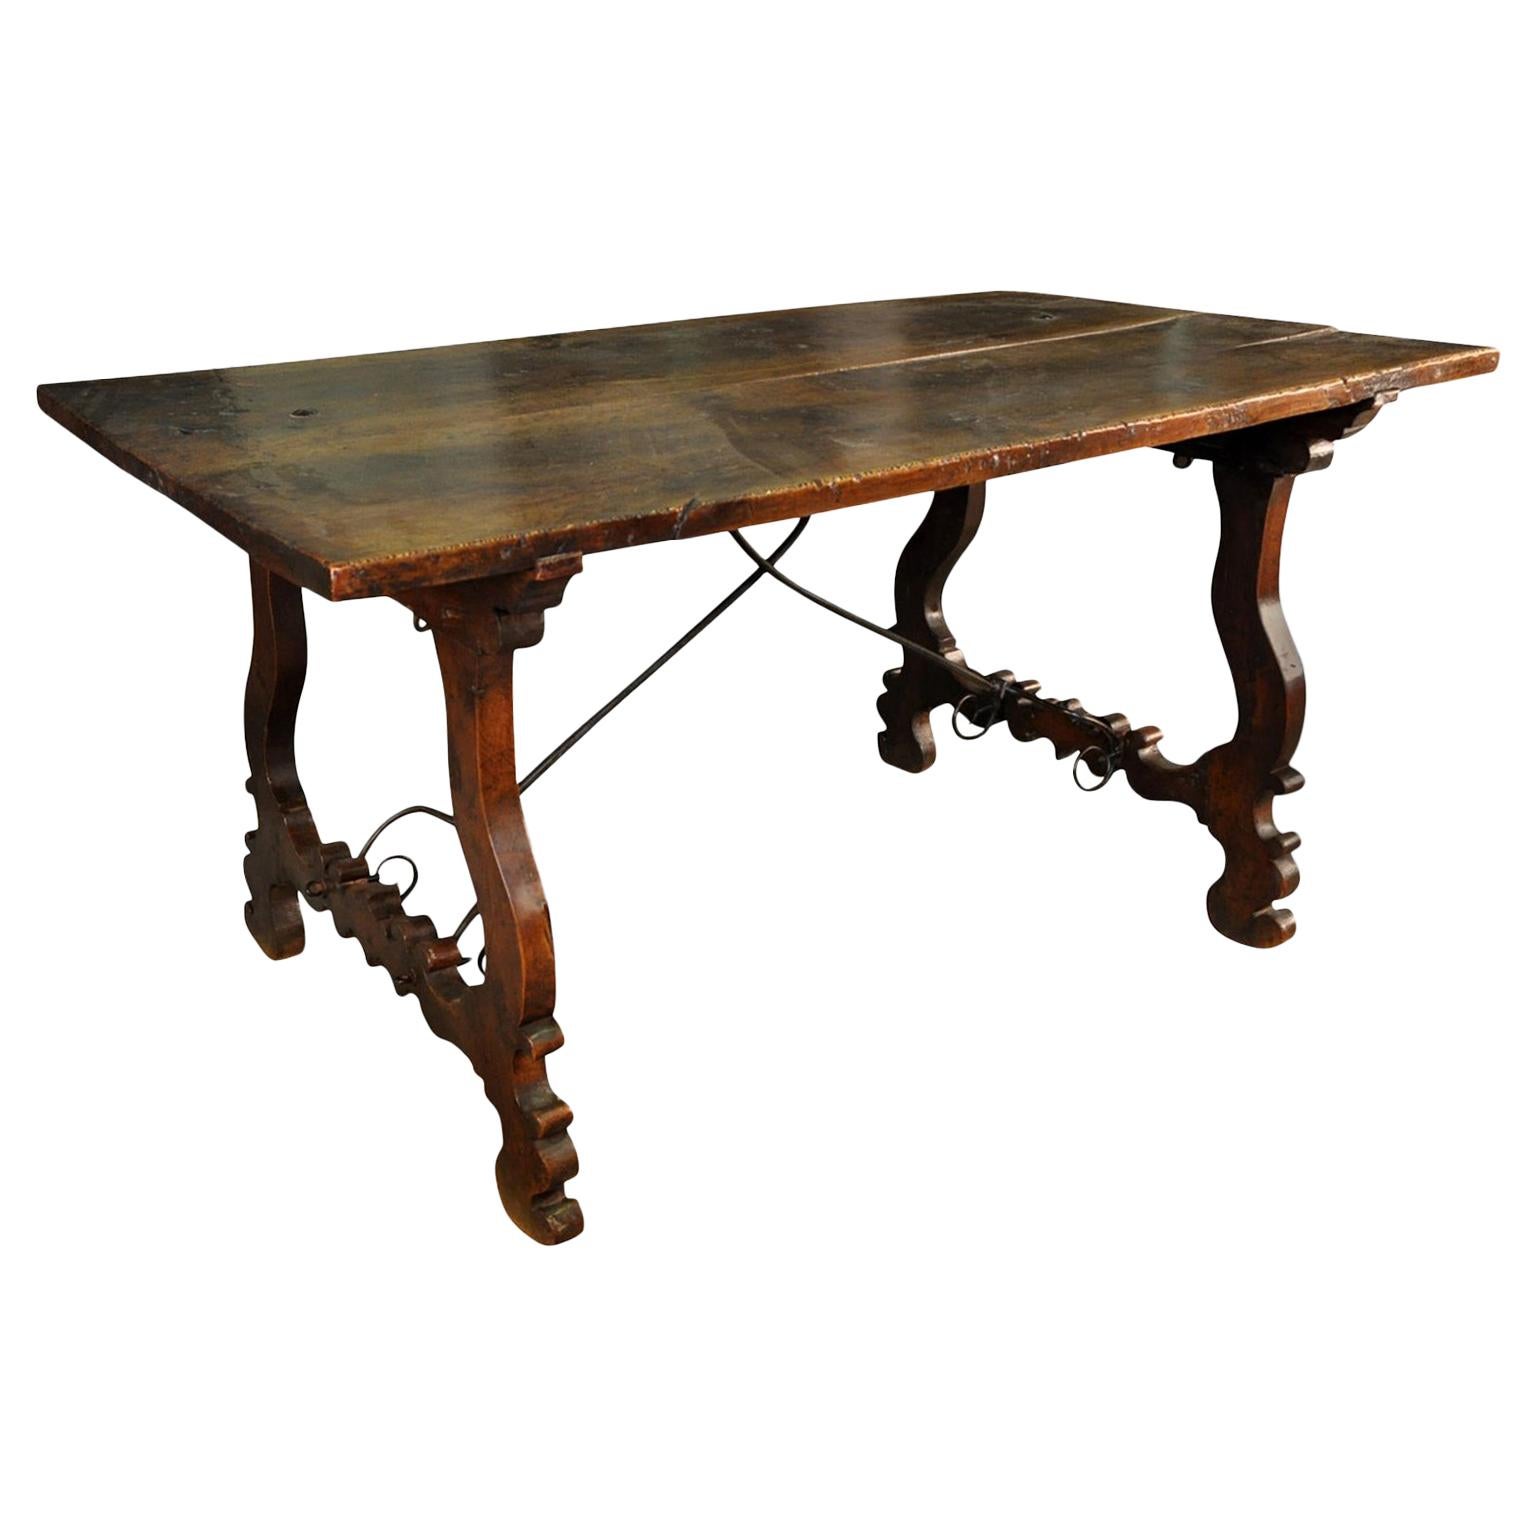 Outstanding 17th Century Spanish Table